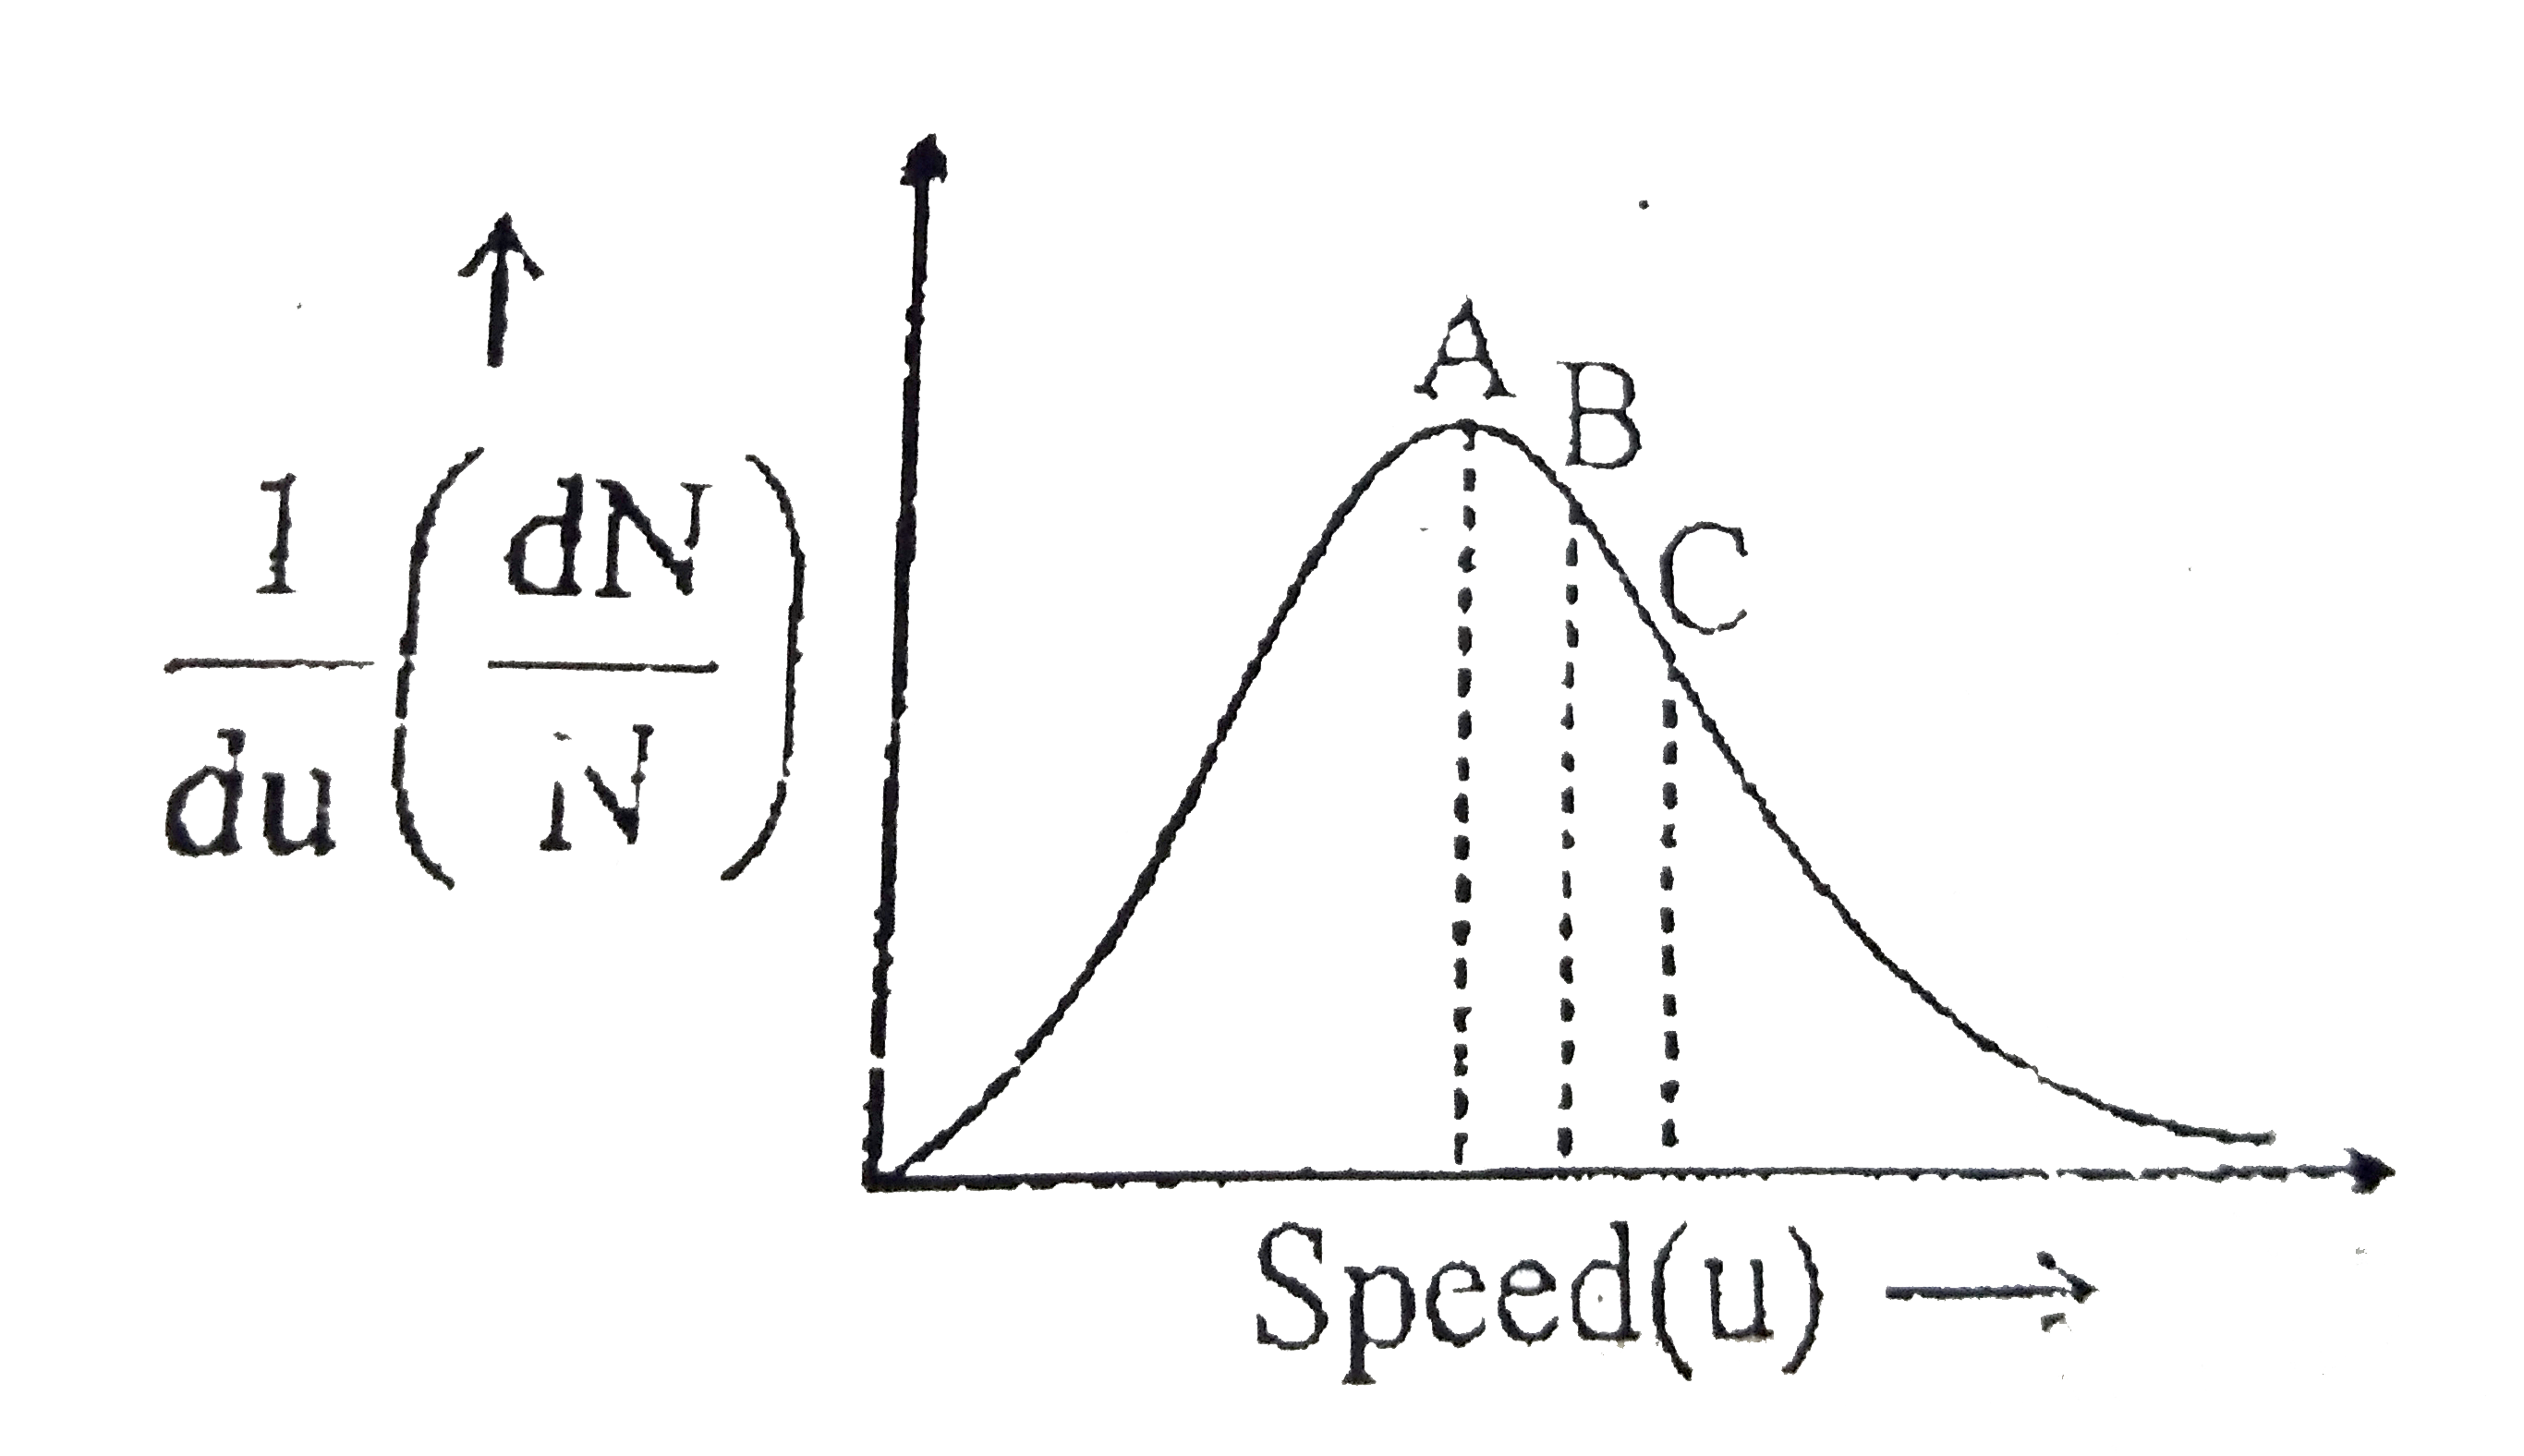 For a sample of an ideal gas at given temperature (T), speed distribution curve is given as follows. Then the speeds corresponding to point A, B and C are respectively known as: